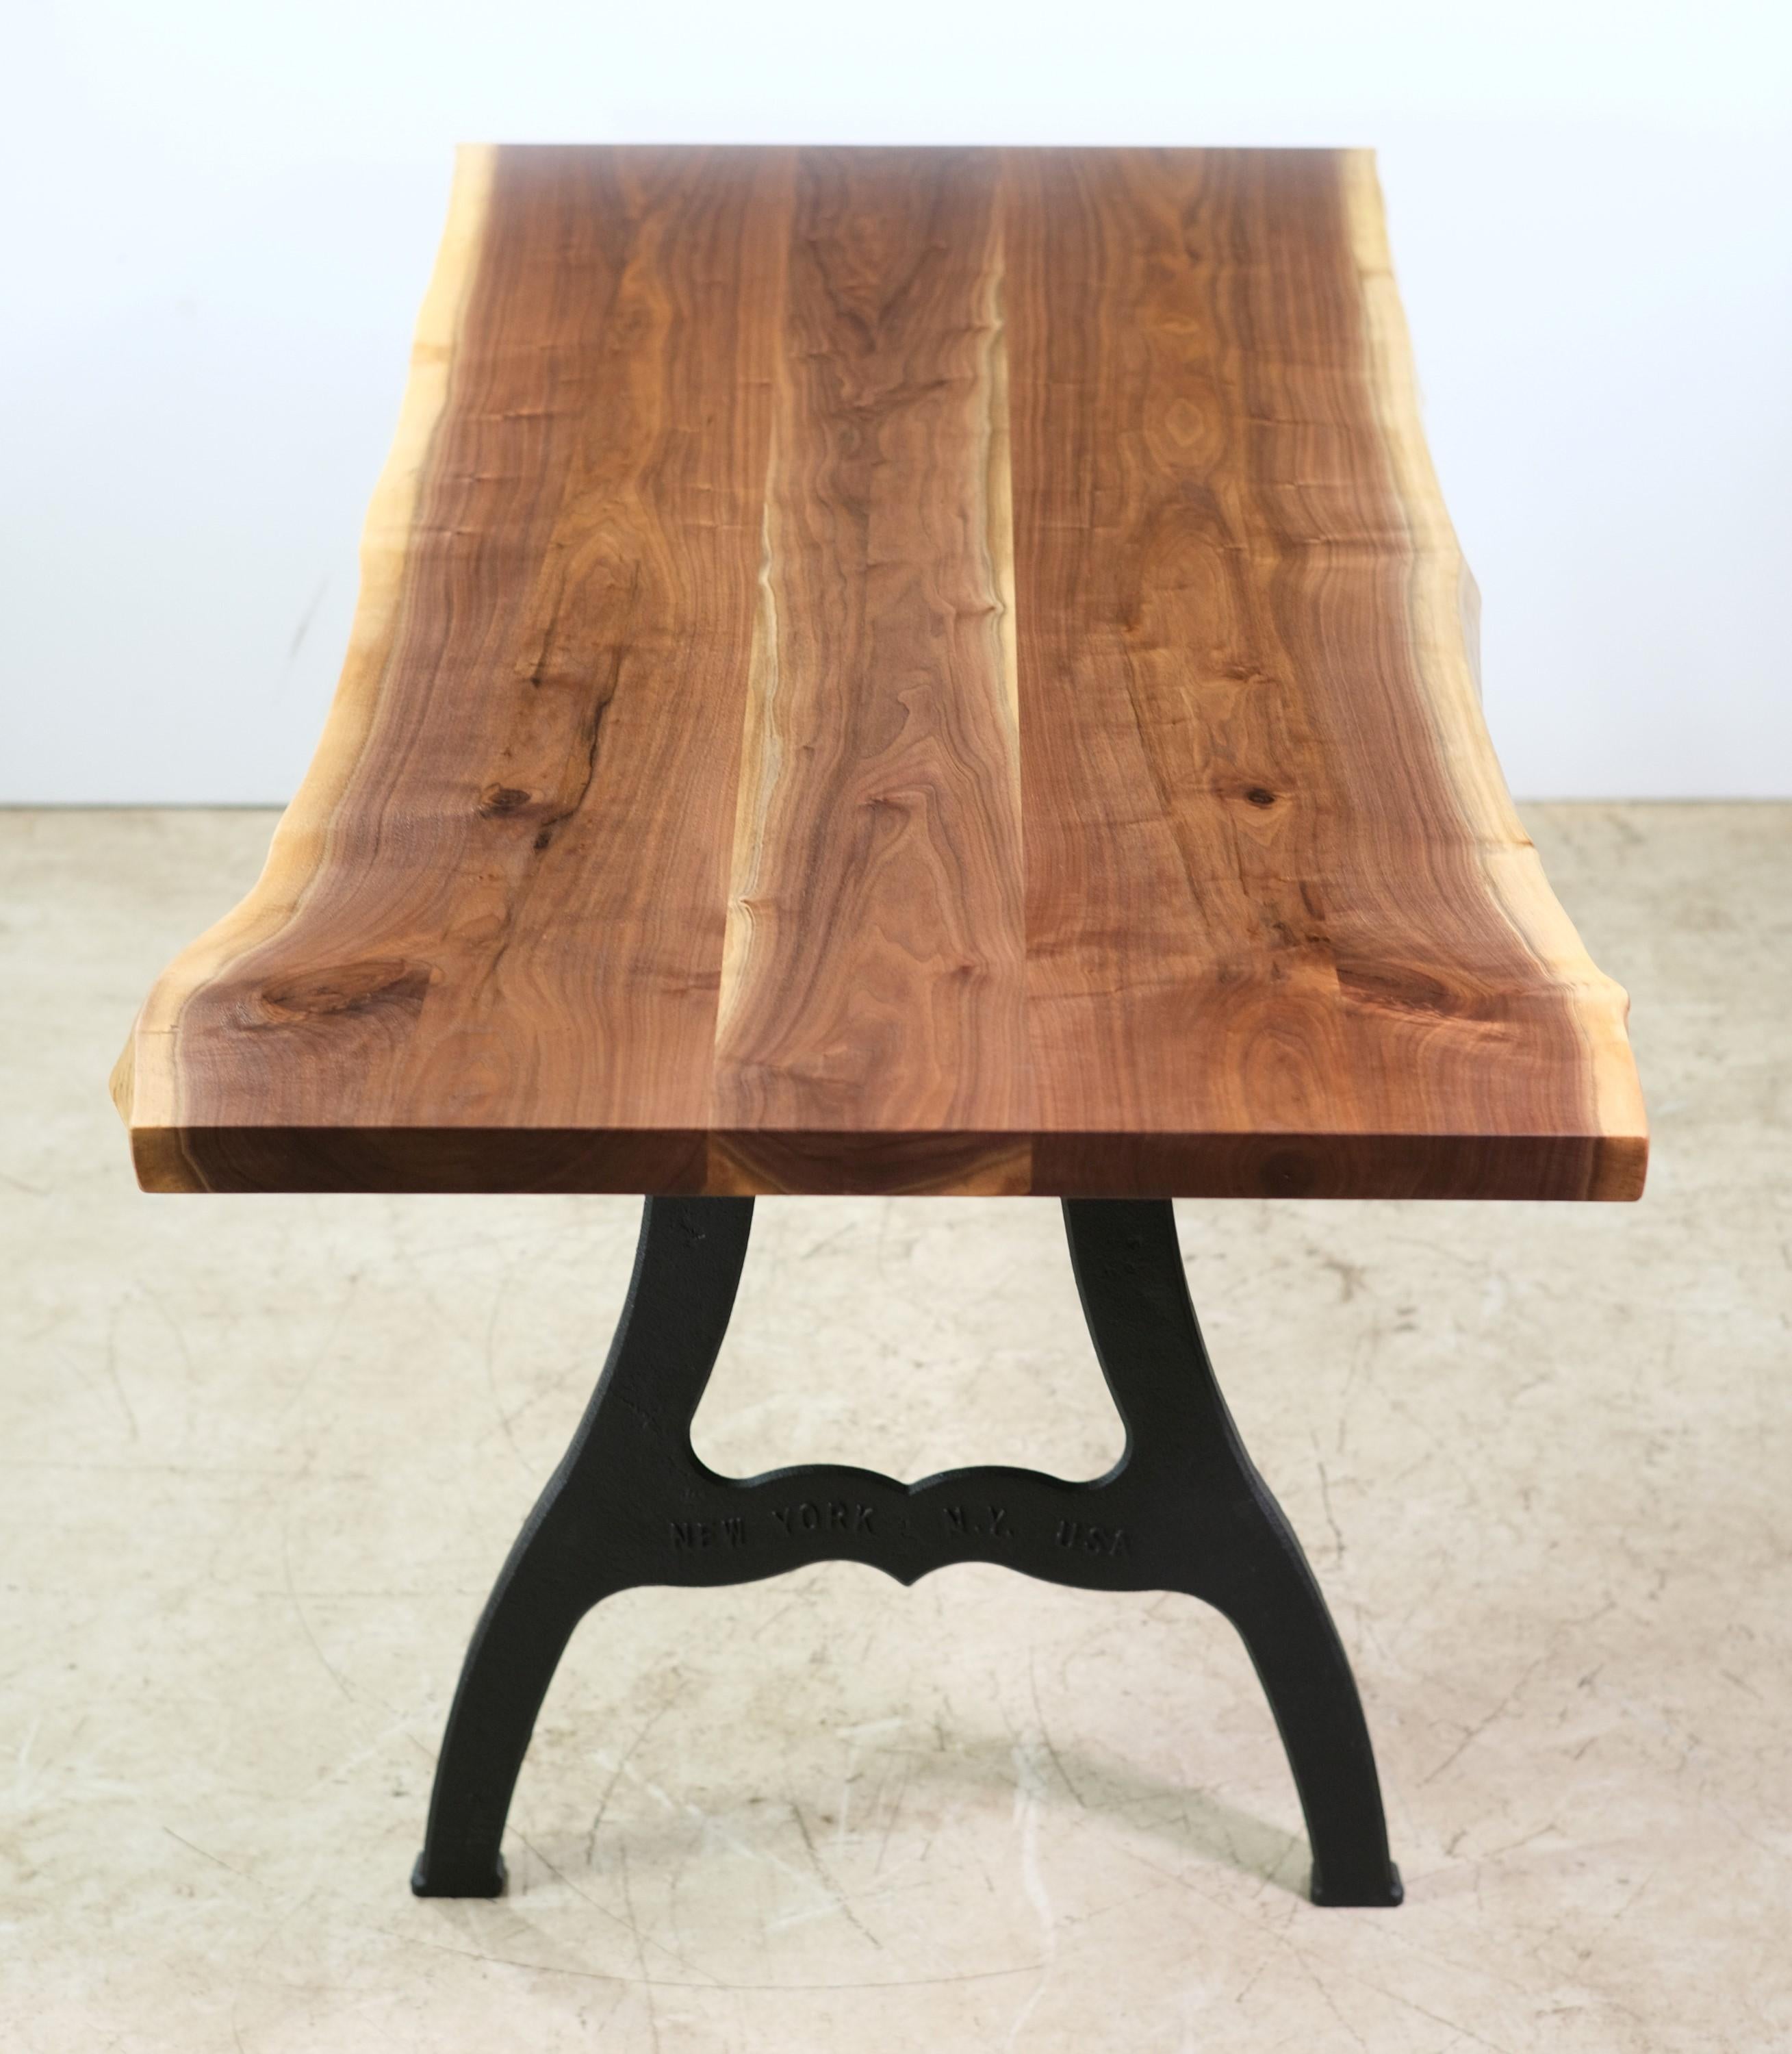 Solid live edge walnut table. Three plank top with the two outside planks bookmatched. Paired with embossed New York, NY industrial cast iron legs. Please note, this item is located in one of our NYC locations.